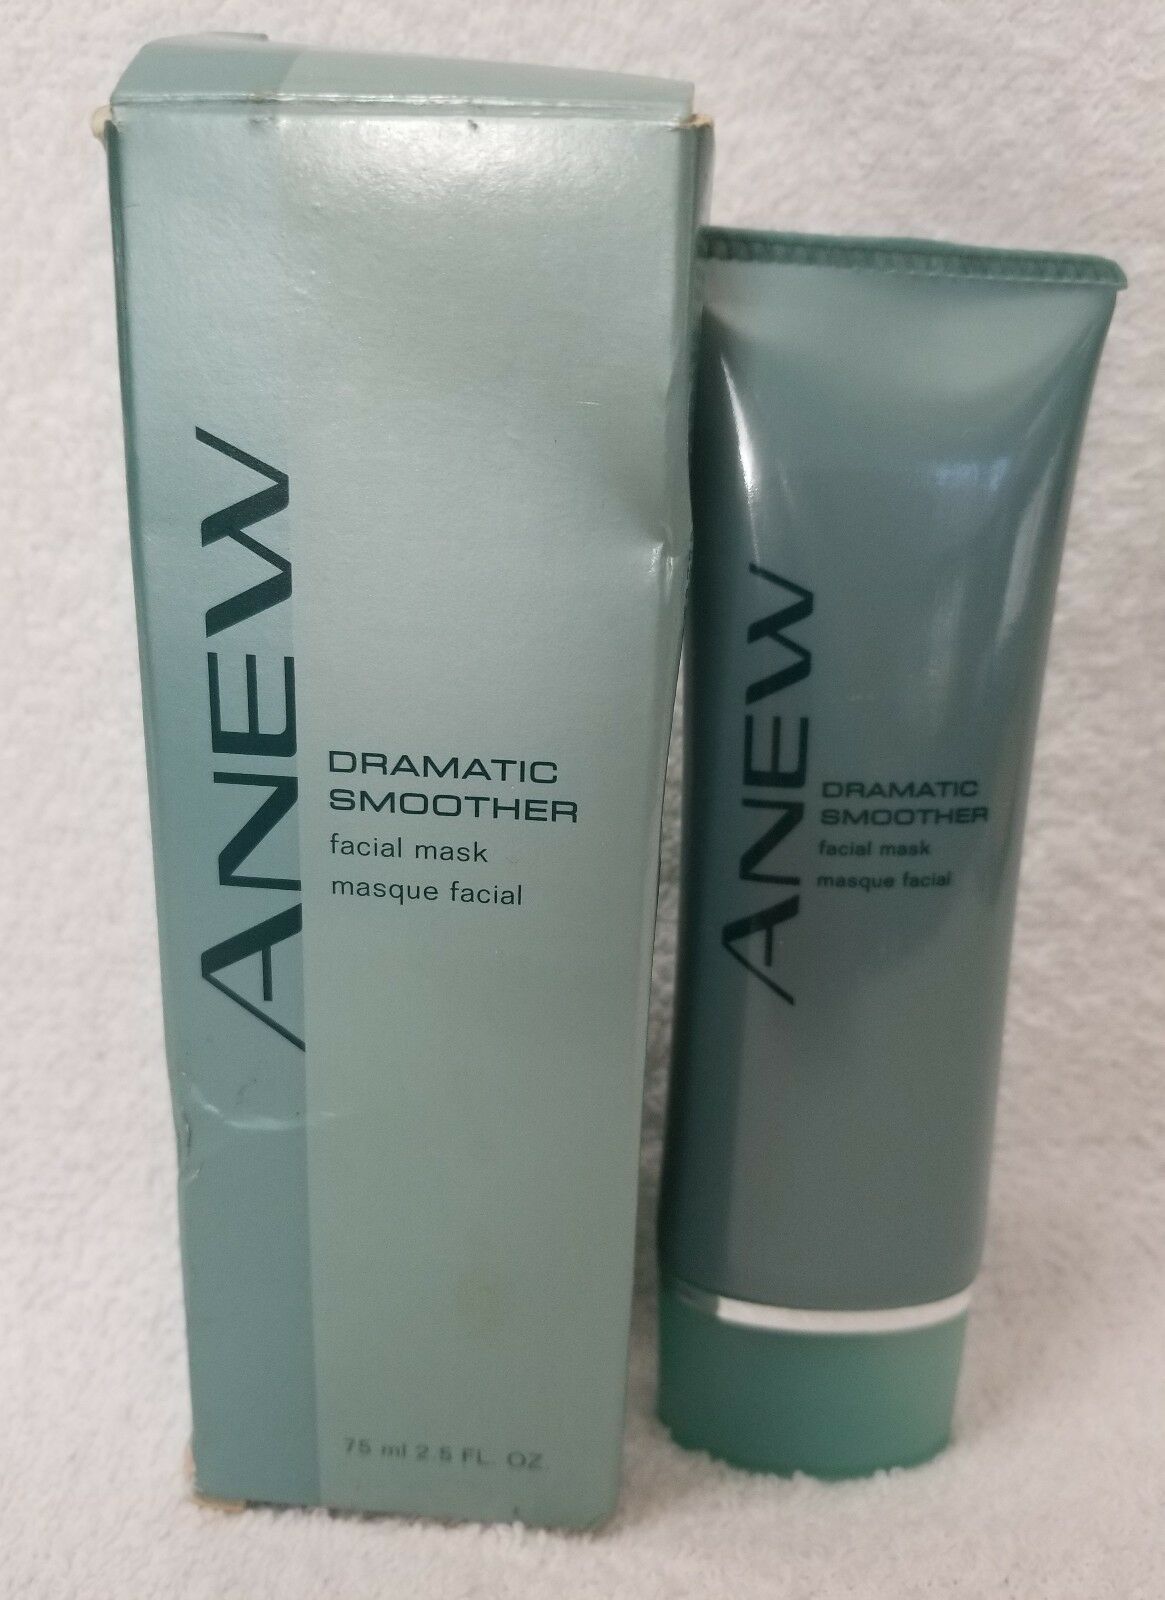 Avon Anew DRAMATIC SMOOTHER Facial Mask Dissolves Rough Dry Skin 2.5 oz/75mL New - $36.63